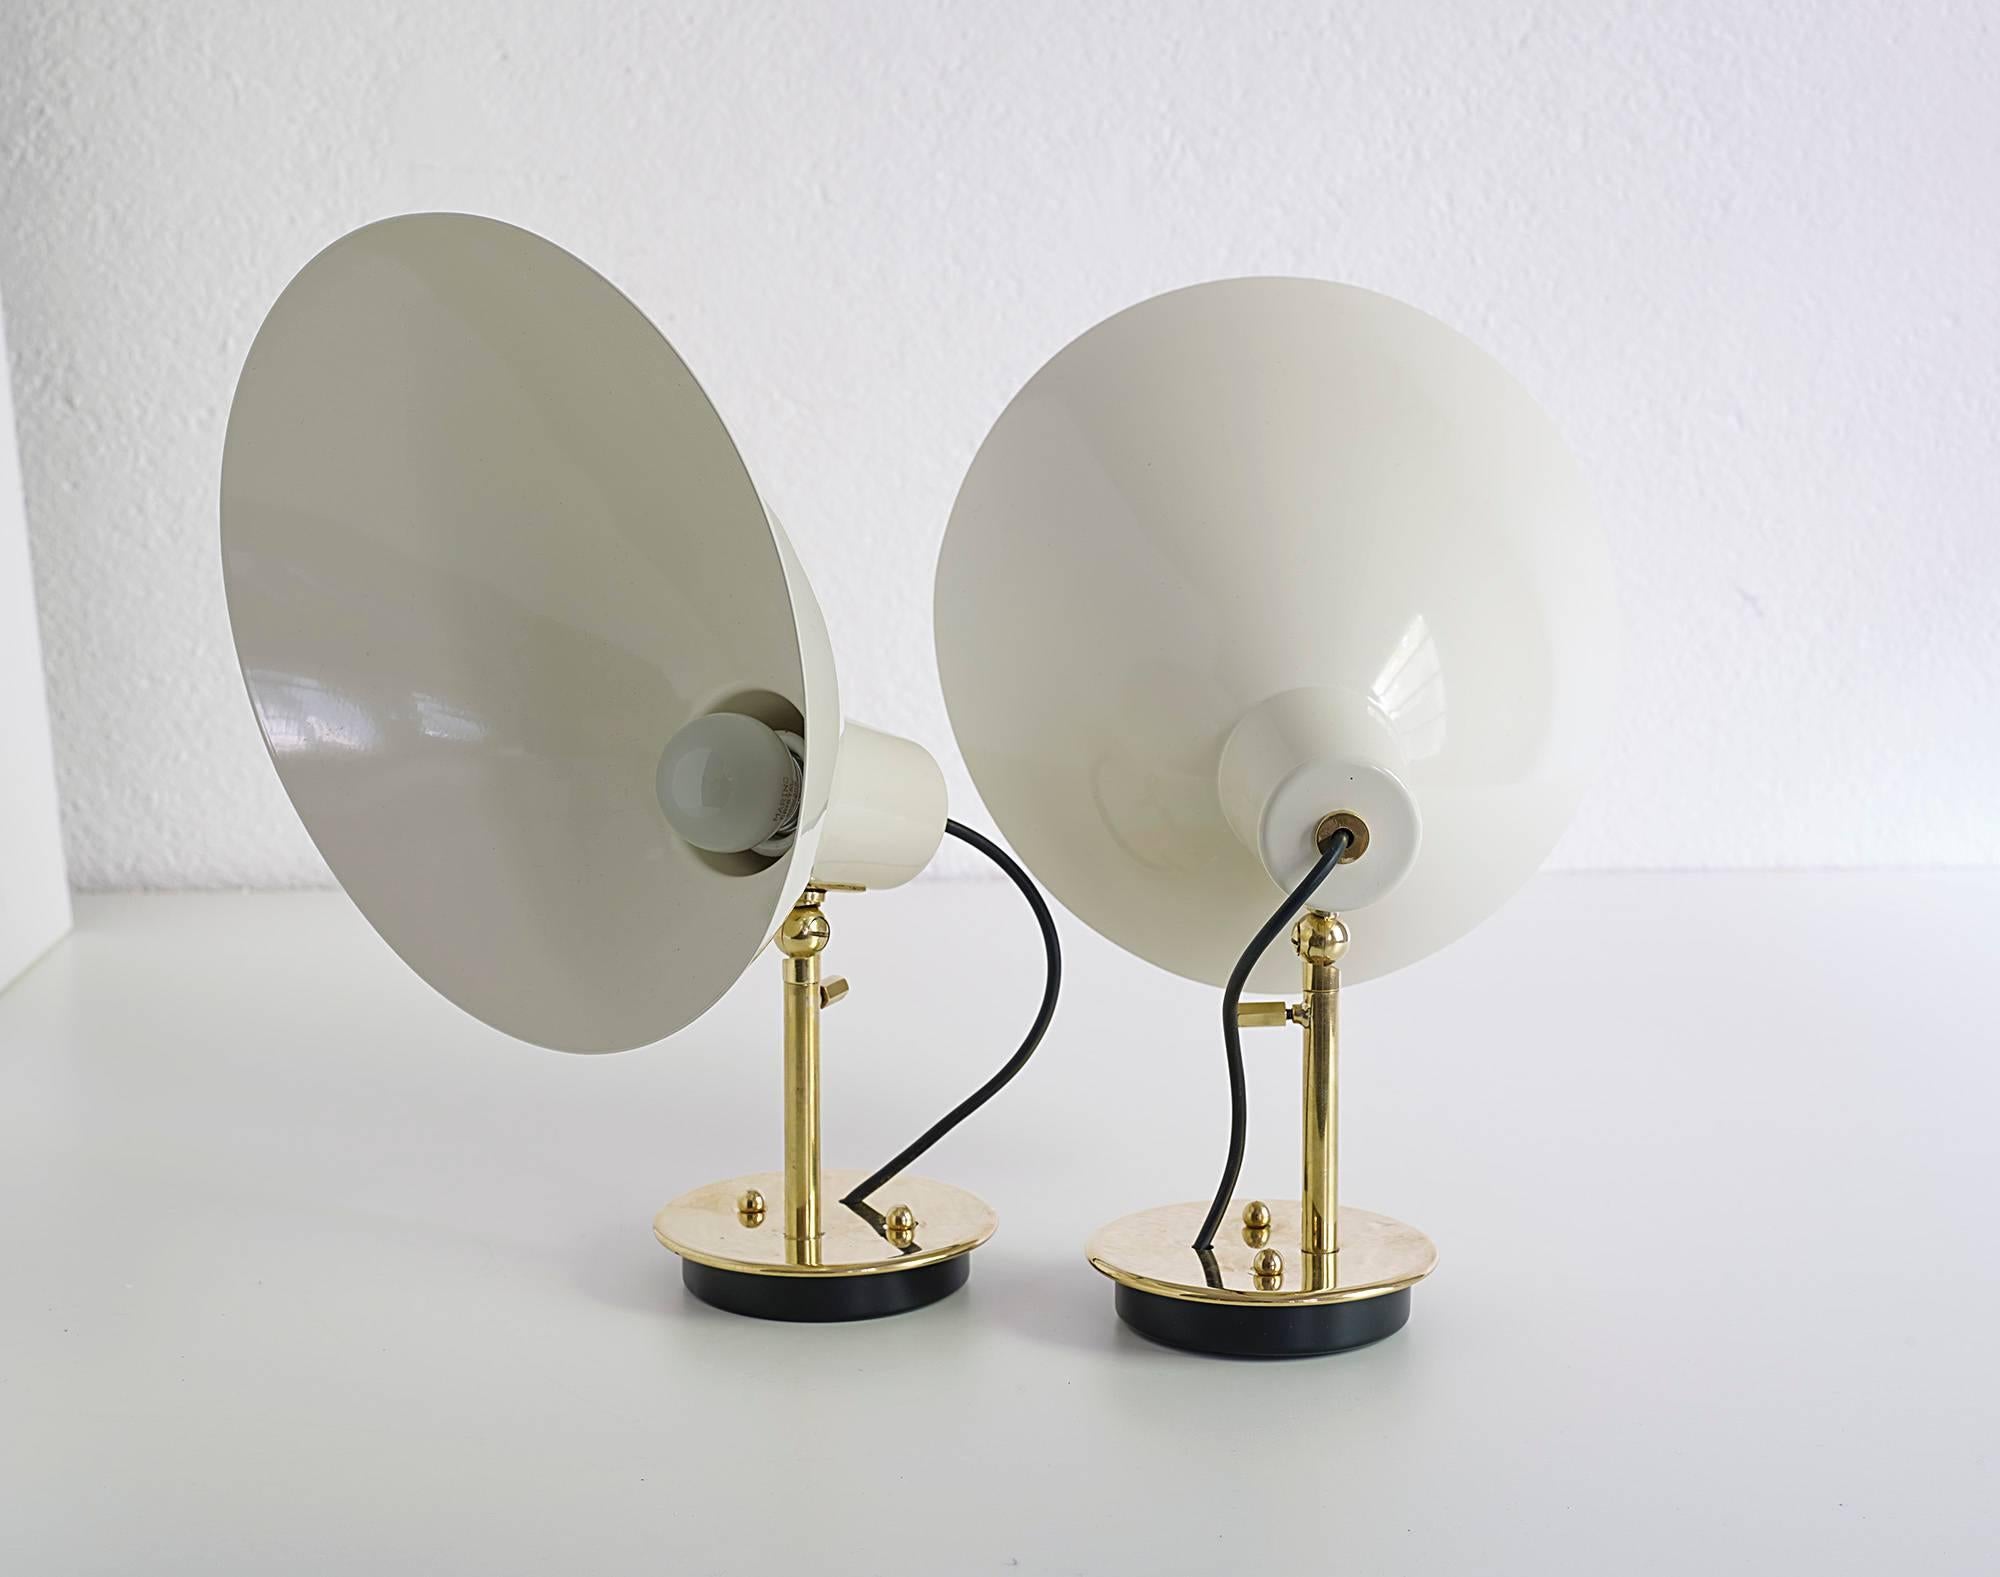 Great pair of model 2 sconces designed by Vittoriano Vigano for Arteluce, Italy, 1950. 

Brass, cream white lacquered shades.

These sconces are just marvelous, restored to perfect condition.